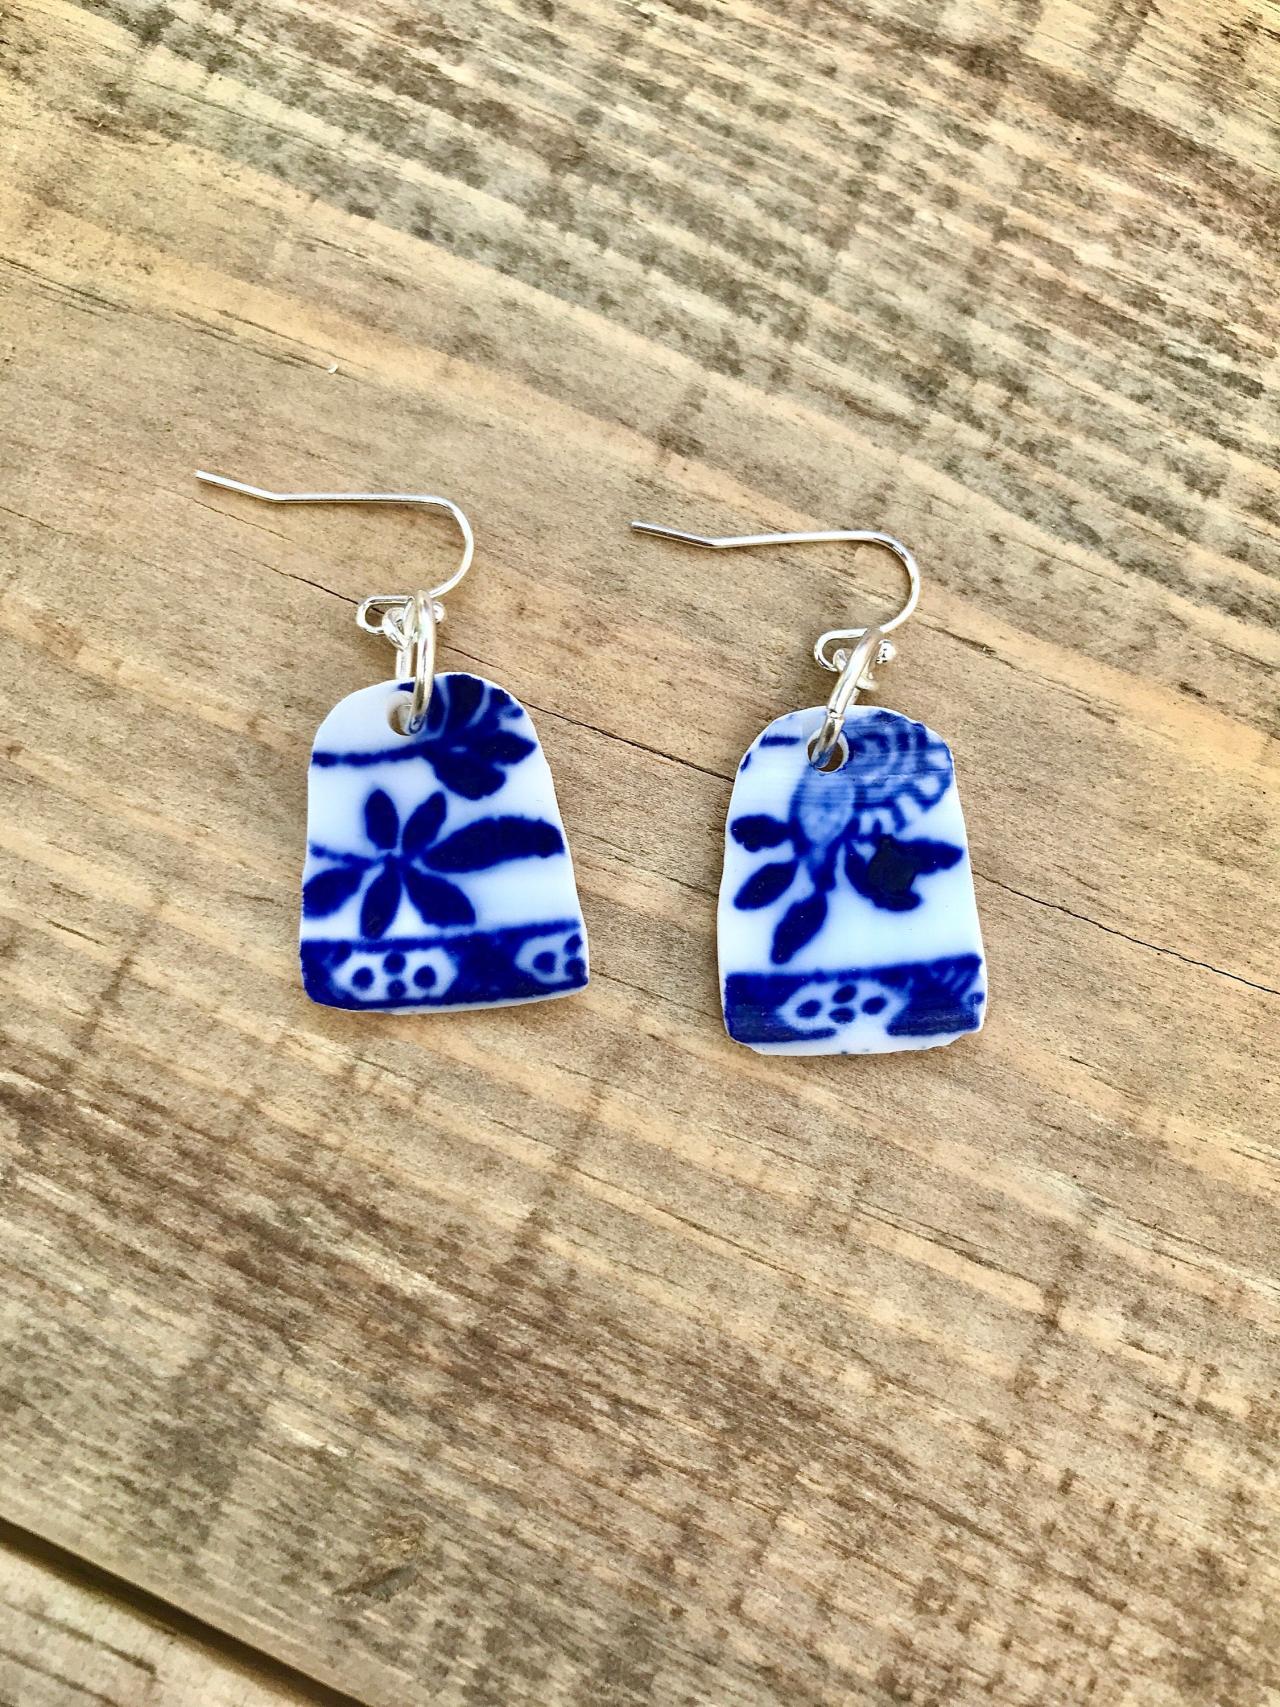 Sweet Blue Vintage Recycled China Dangle Earrings With Sterling Silver Earwires